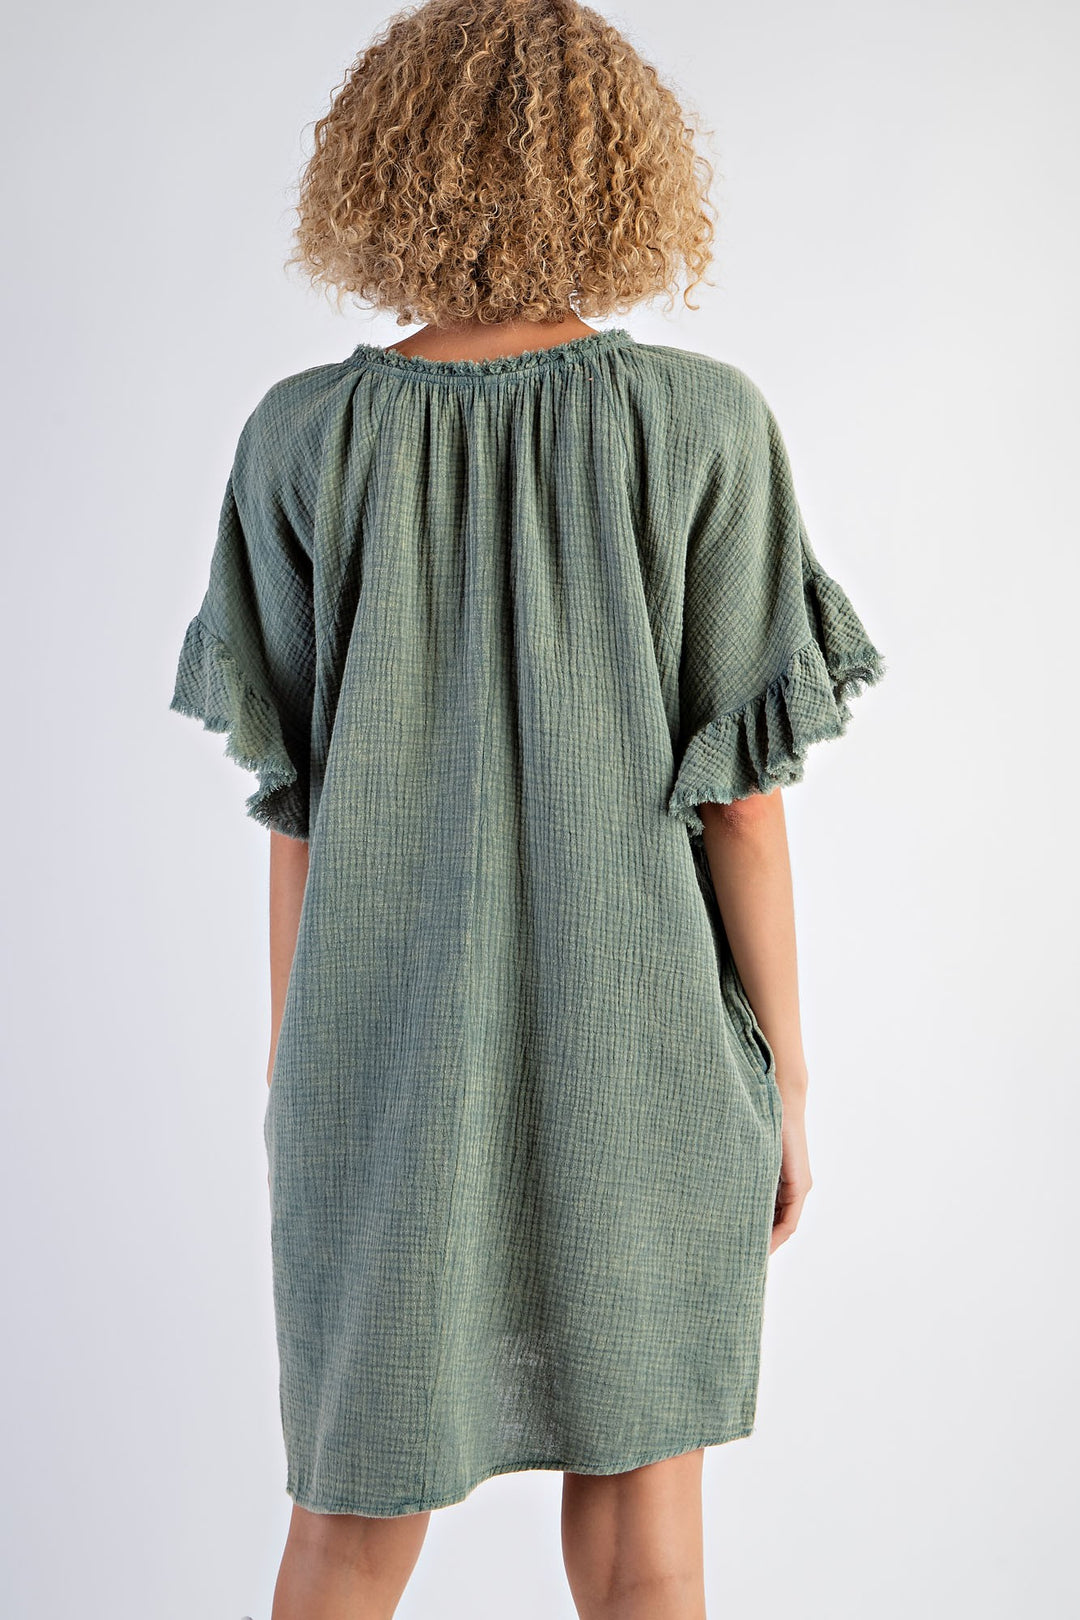 MINERAL WASHED COTTON GAUZE DRESS